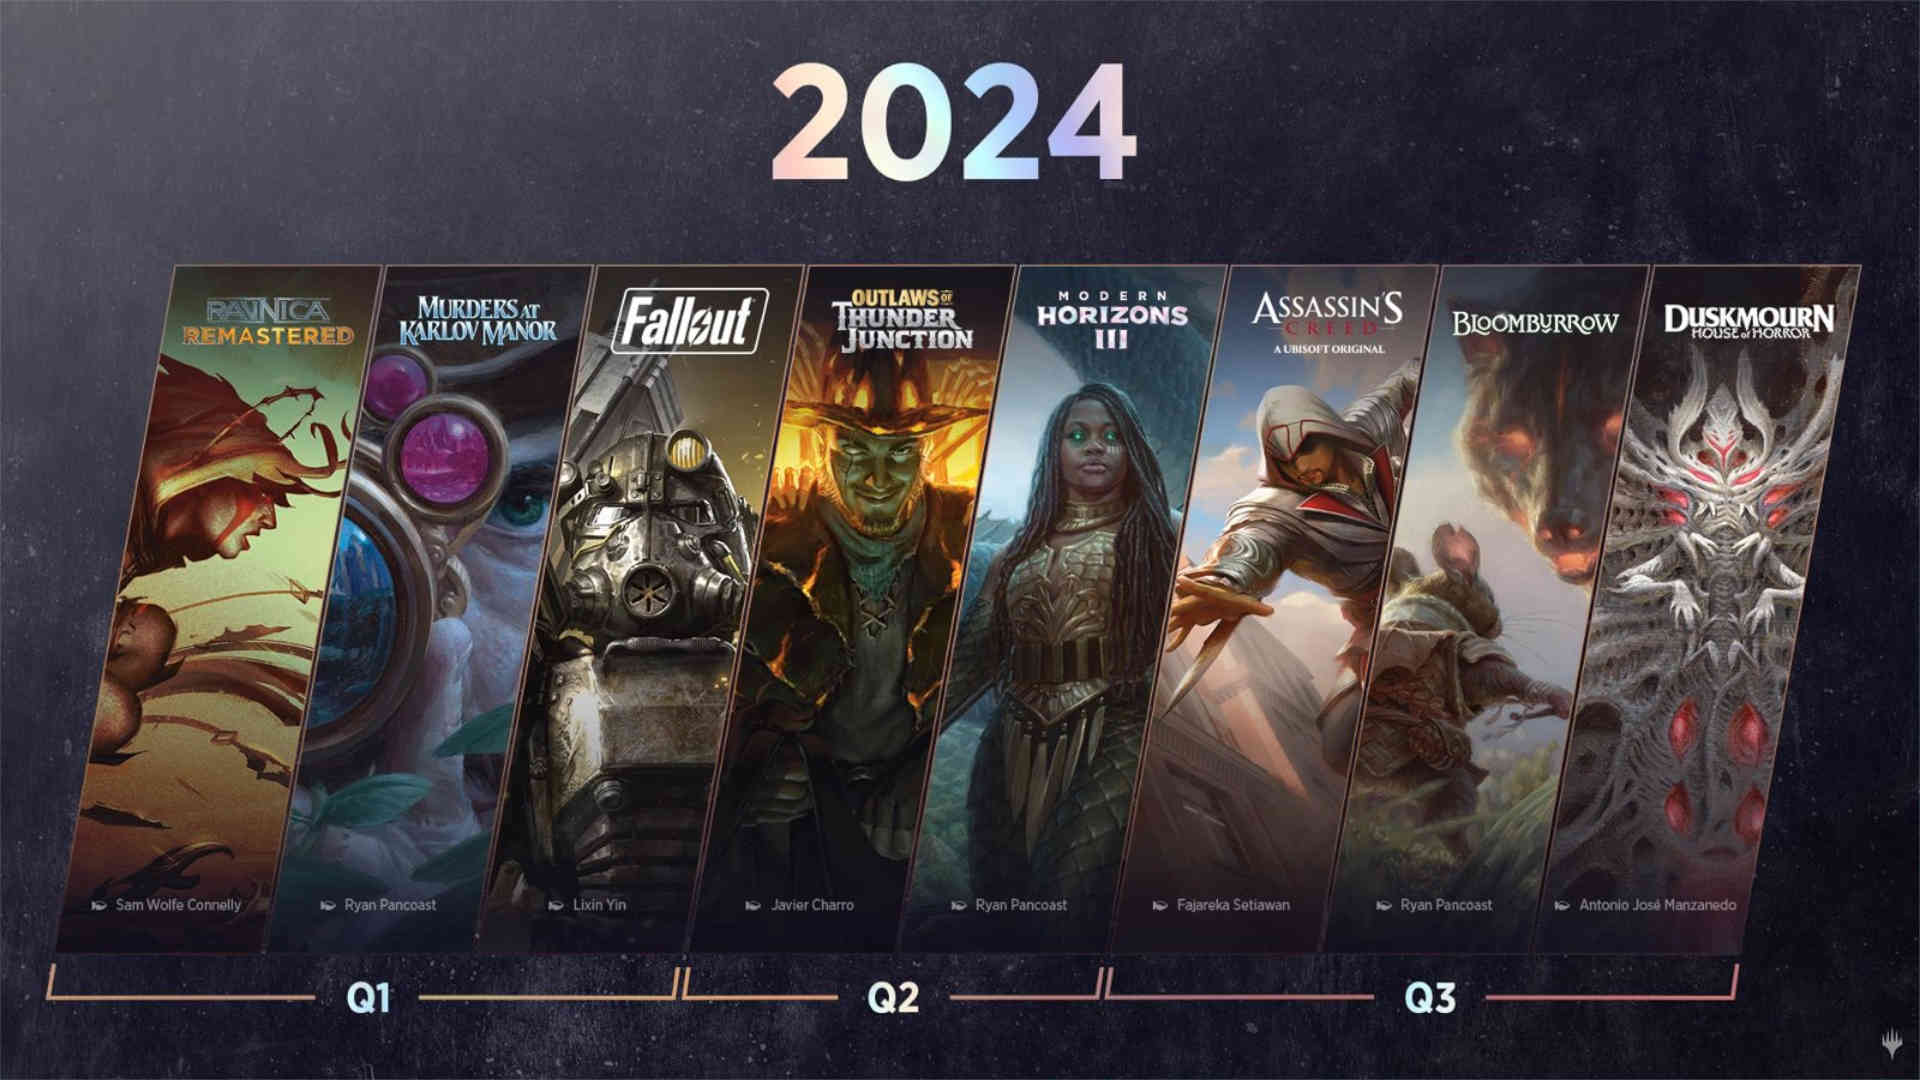 Upcoming PC games: 2023, 2024, and beyond